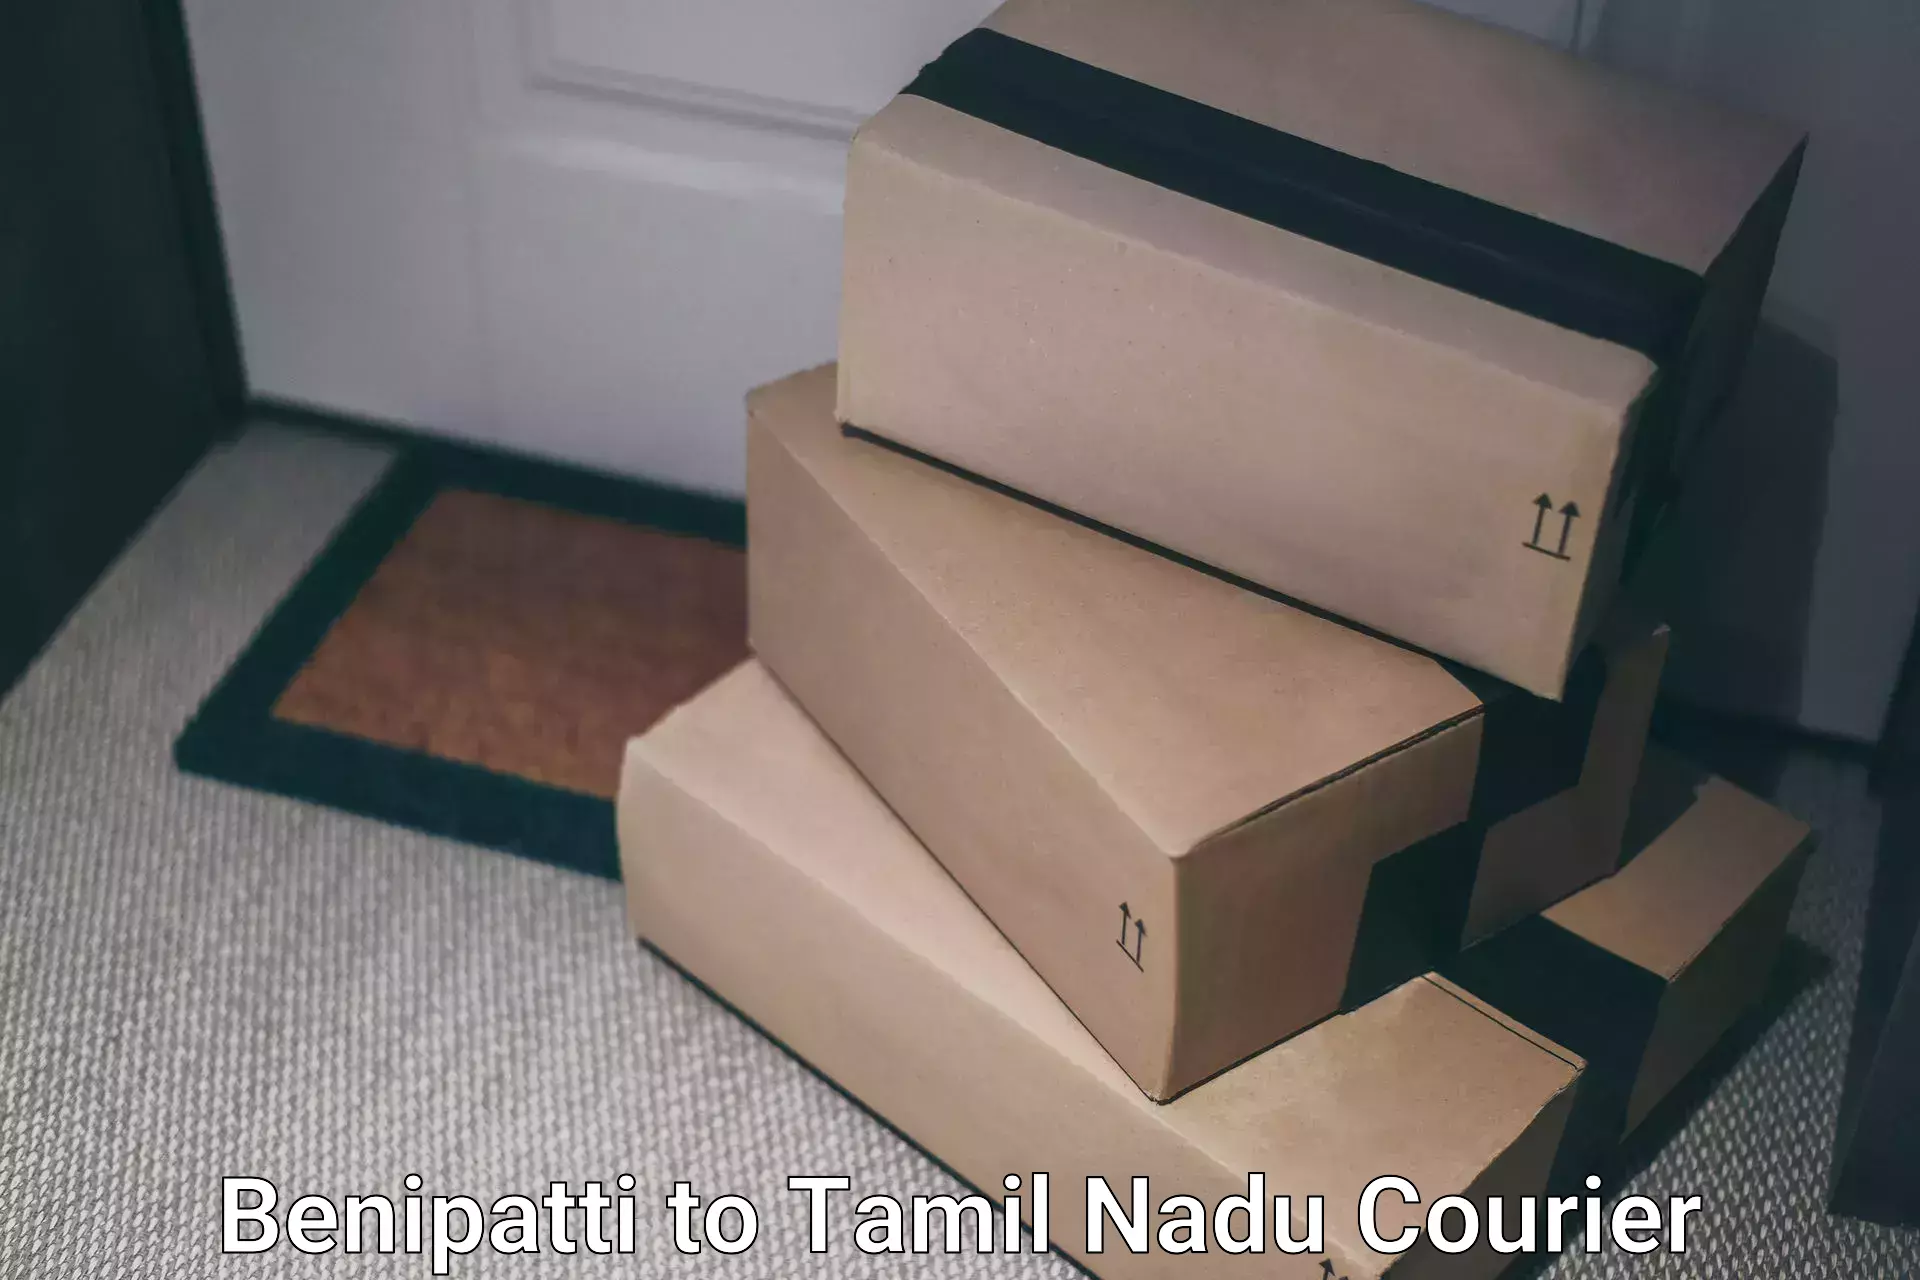 24-hour courier services Benipatti to Meenakshi Academy of Higher Education and Research Chennai